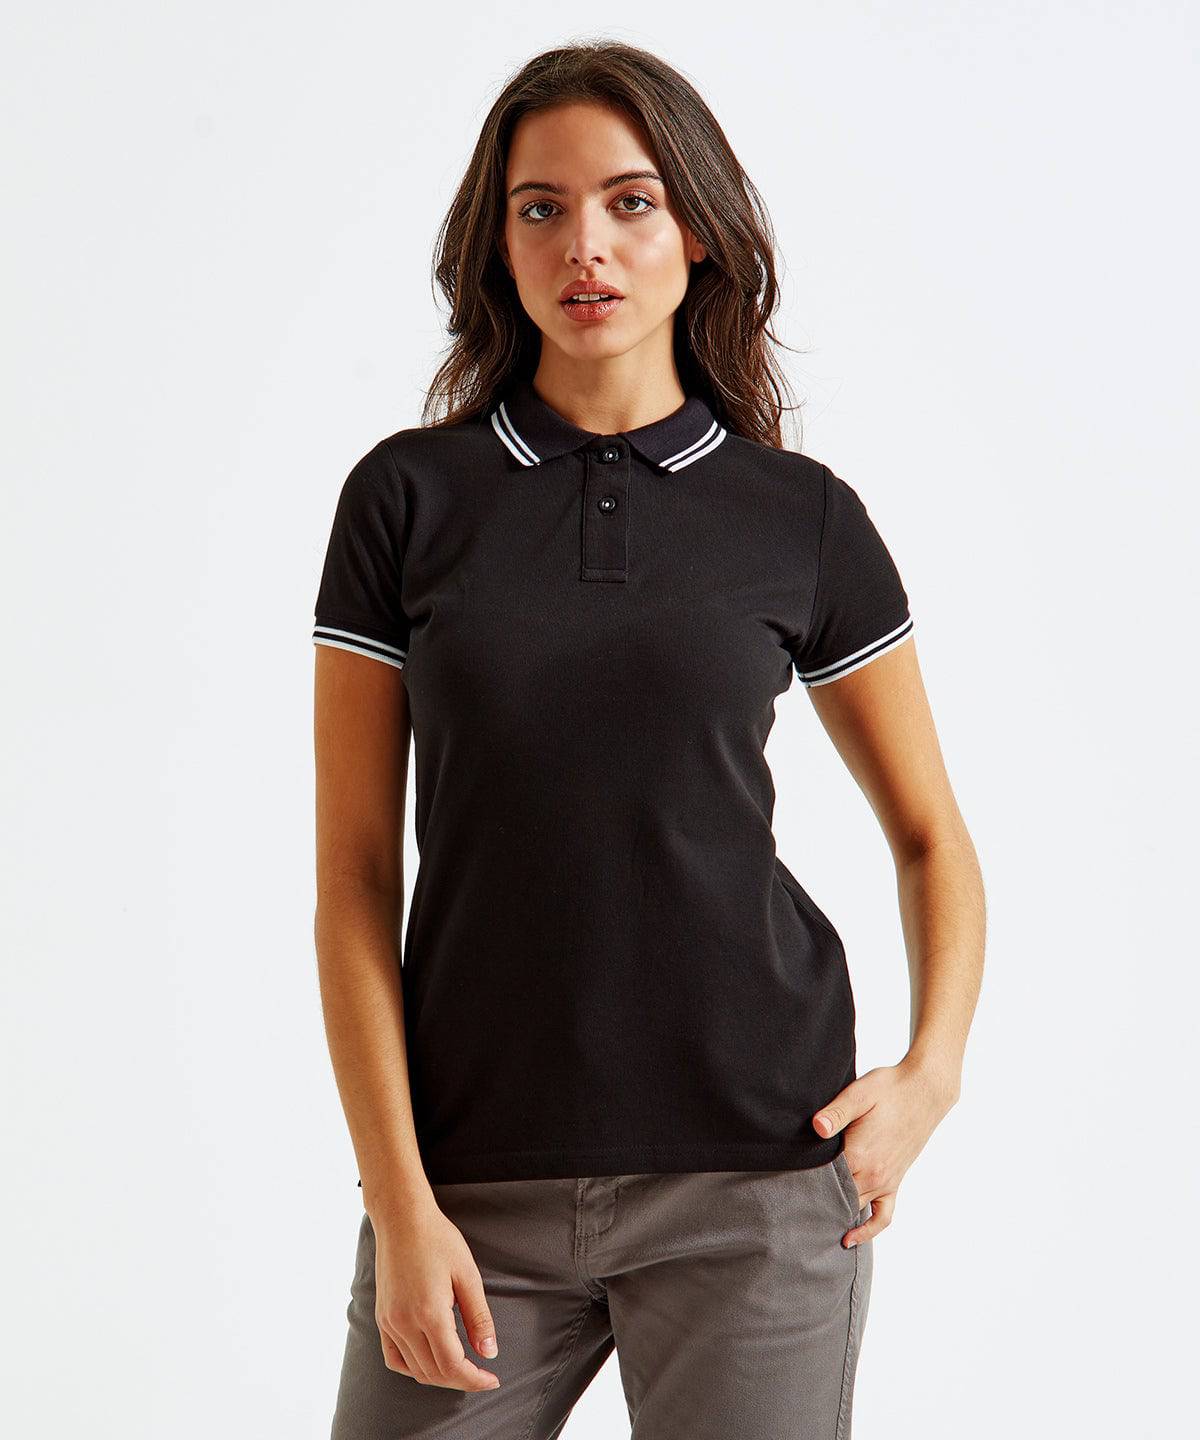 Black/White - Women's classic fit tipped polo